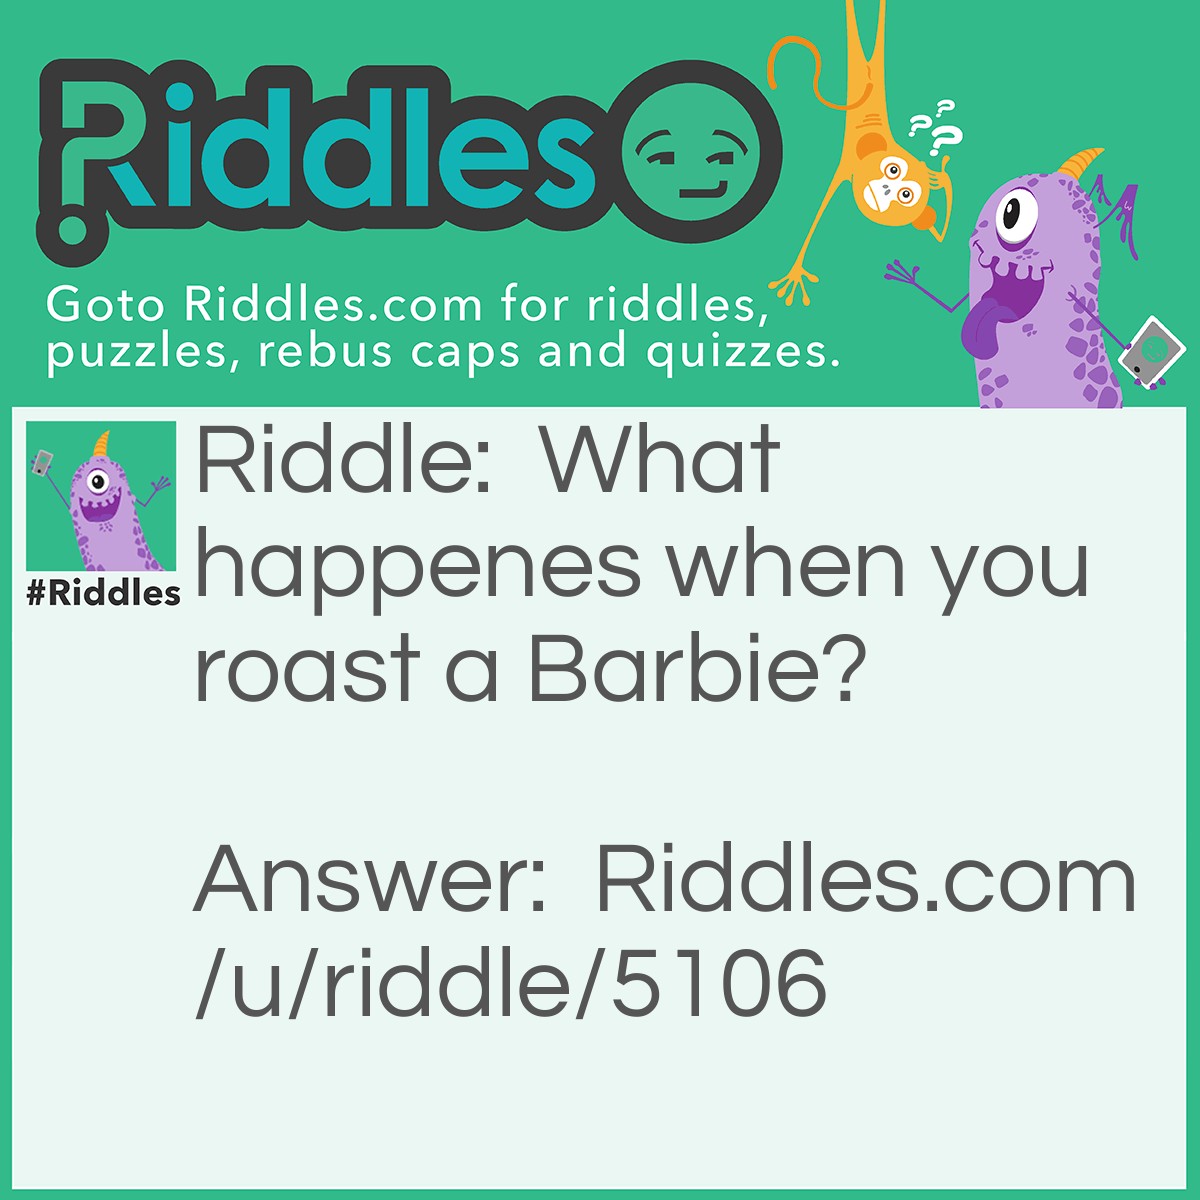 Riddle: What happenes when you roast a Barbie? Answer: It becomes Barbie-Que.